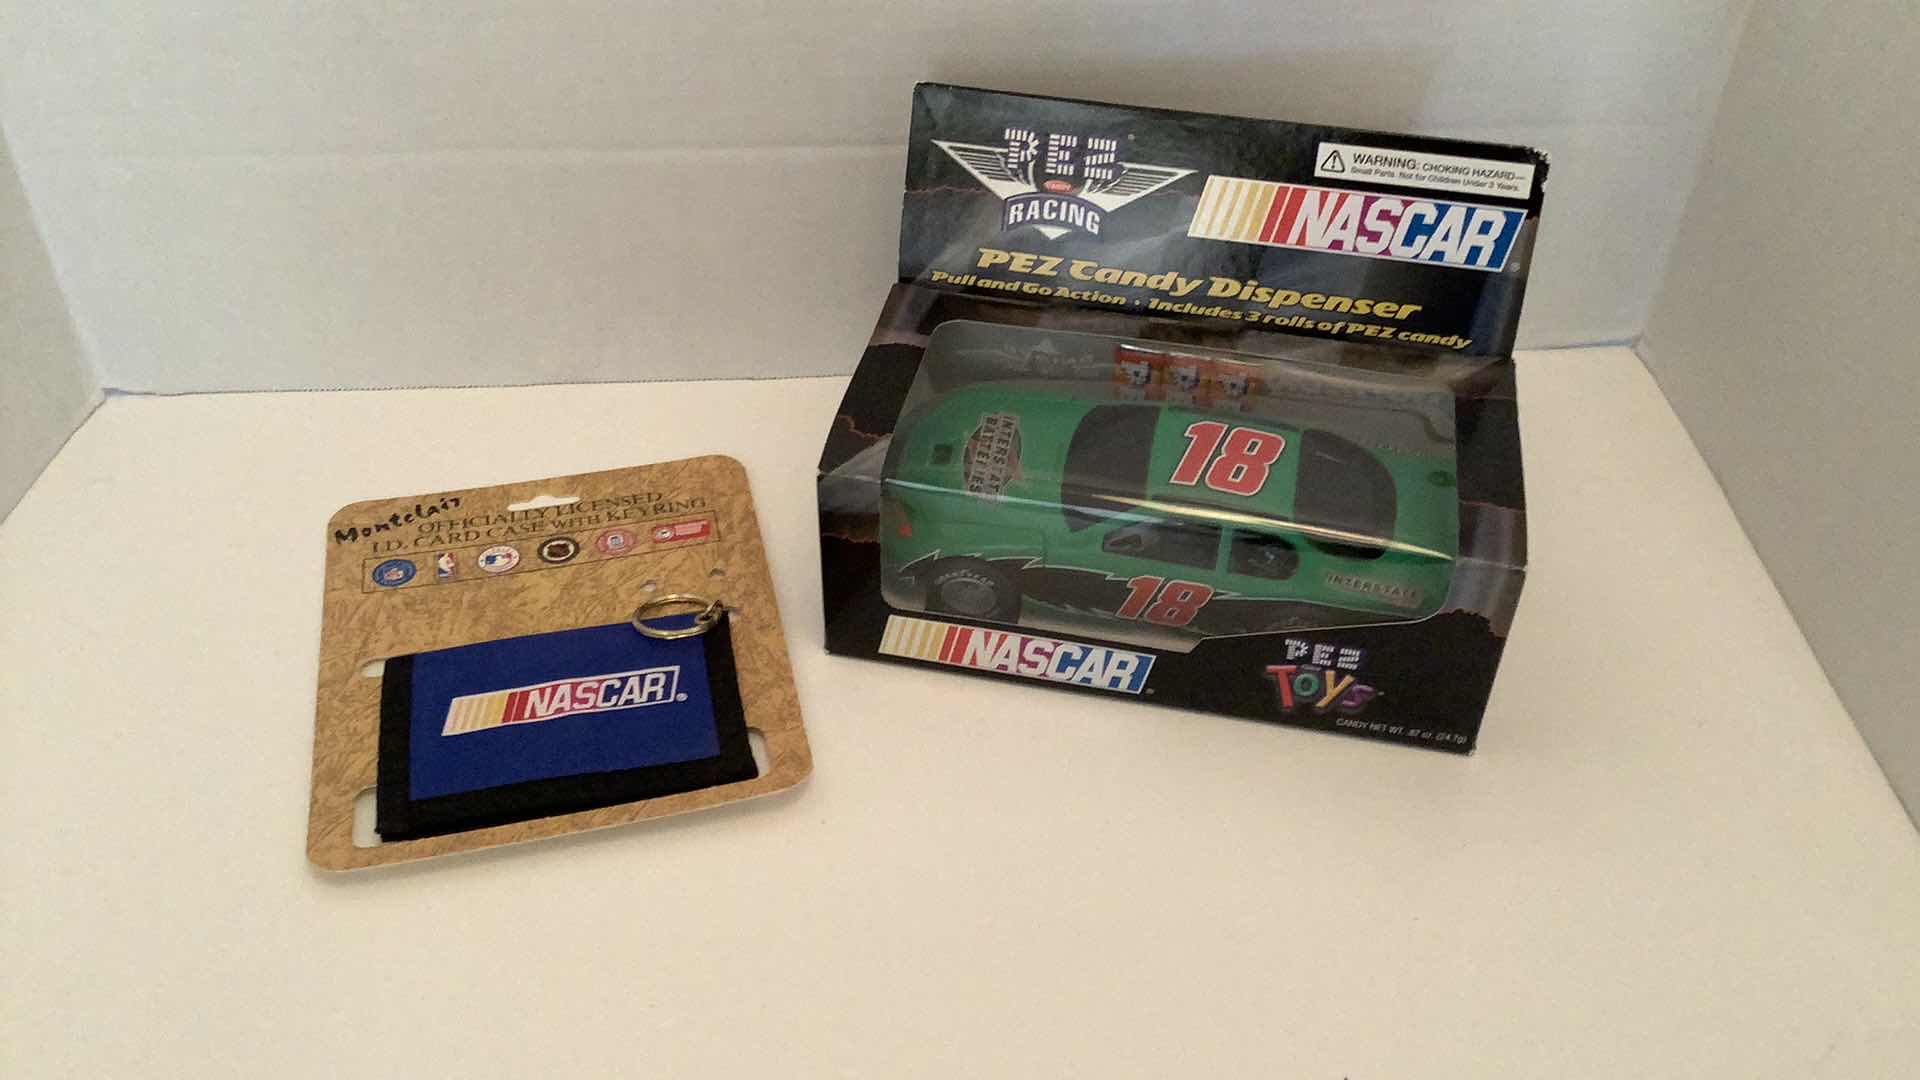 Photo 1 of NASCAR #18 PEZ CANDY DISPENSER AND CARD CASE